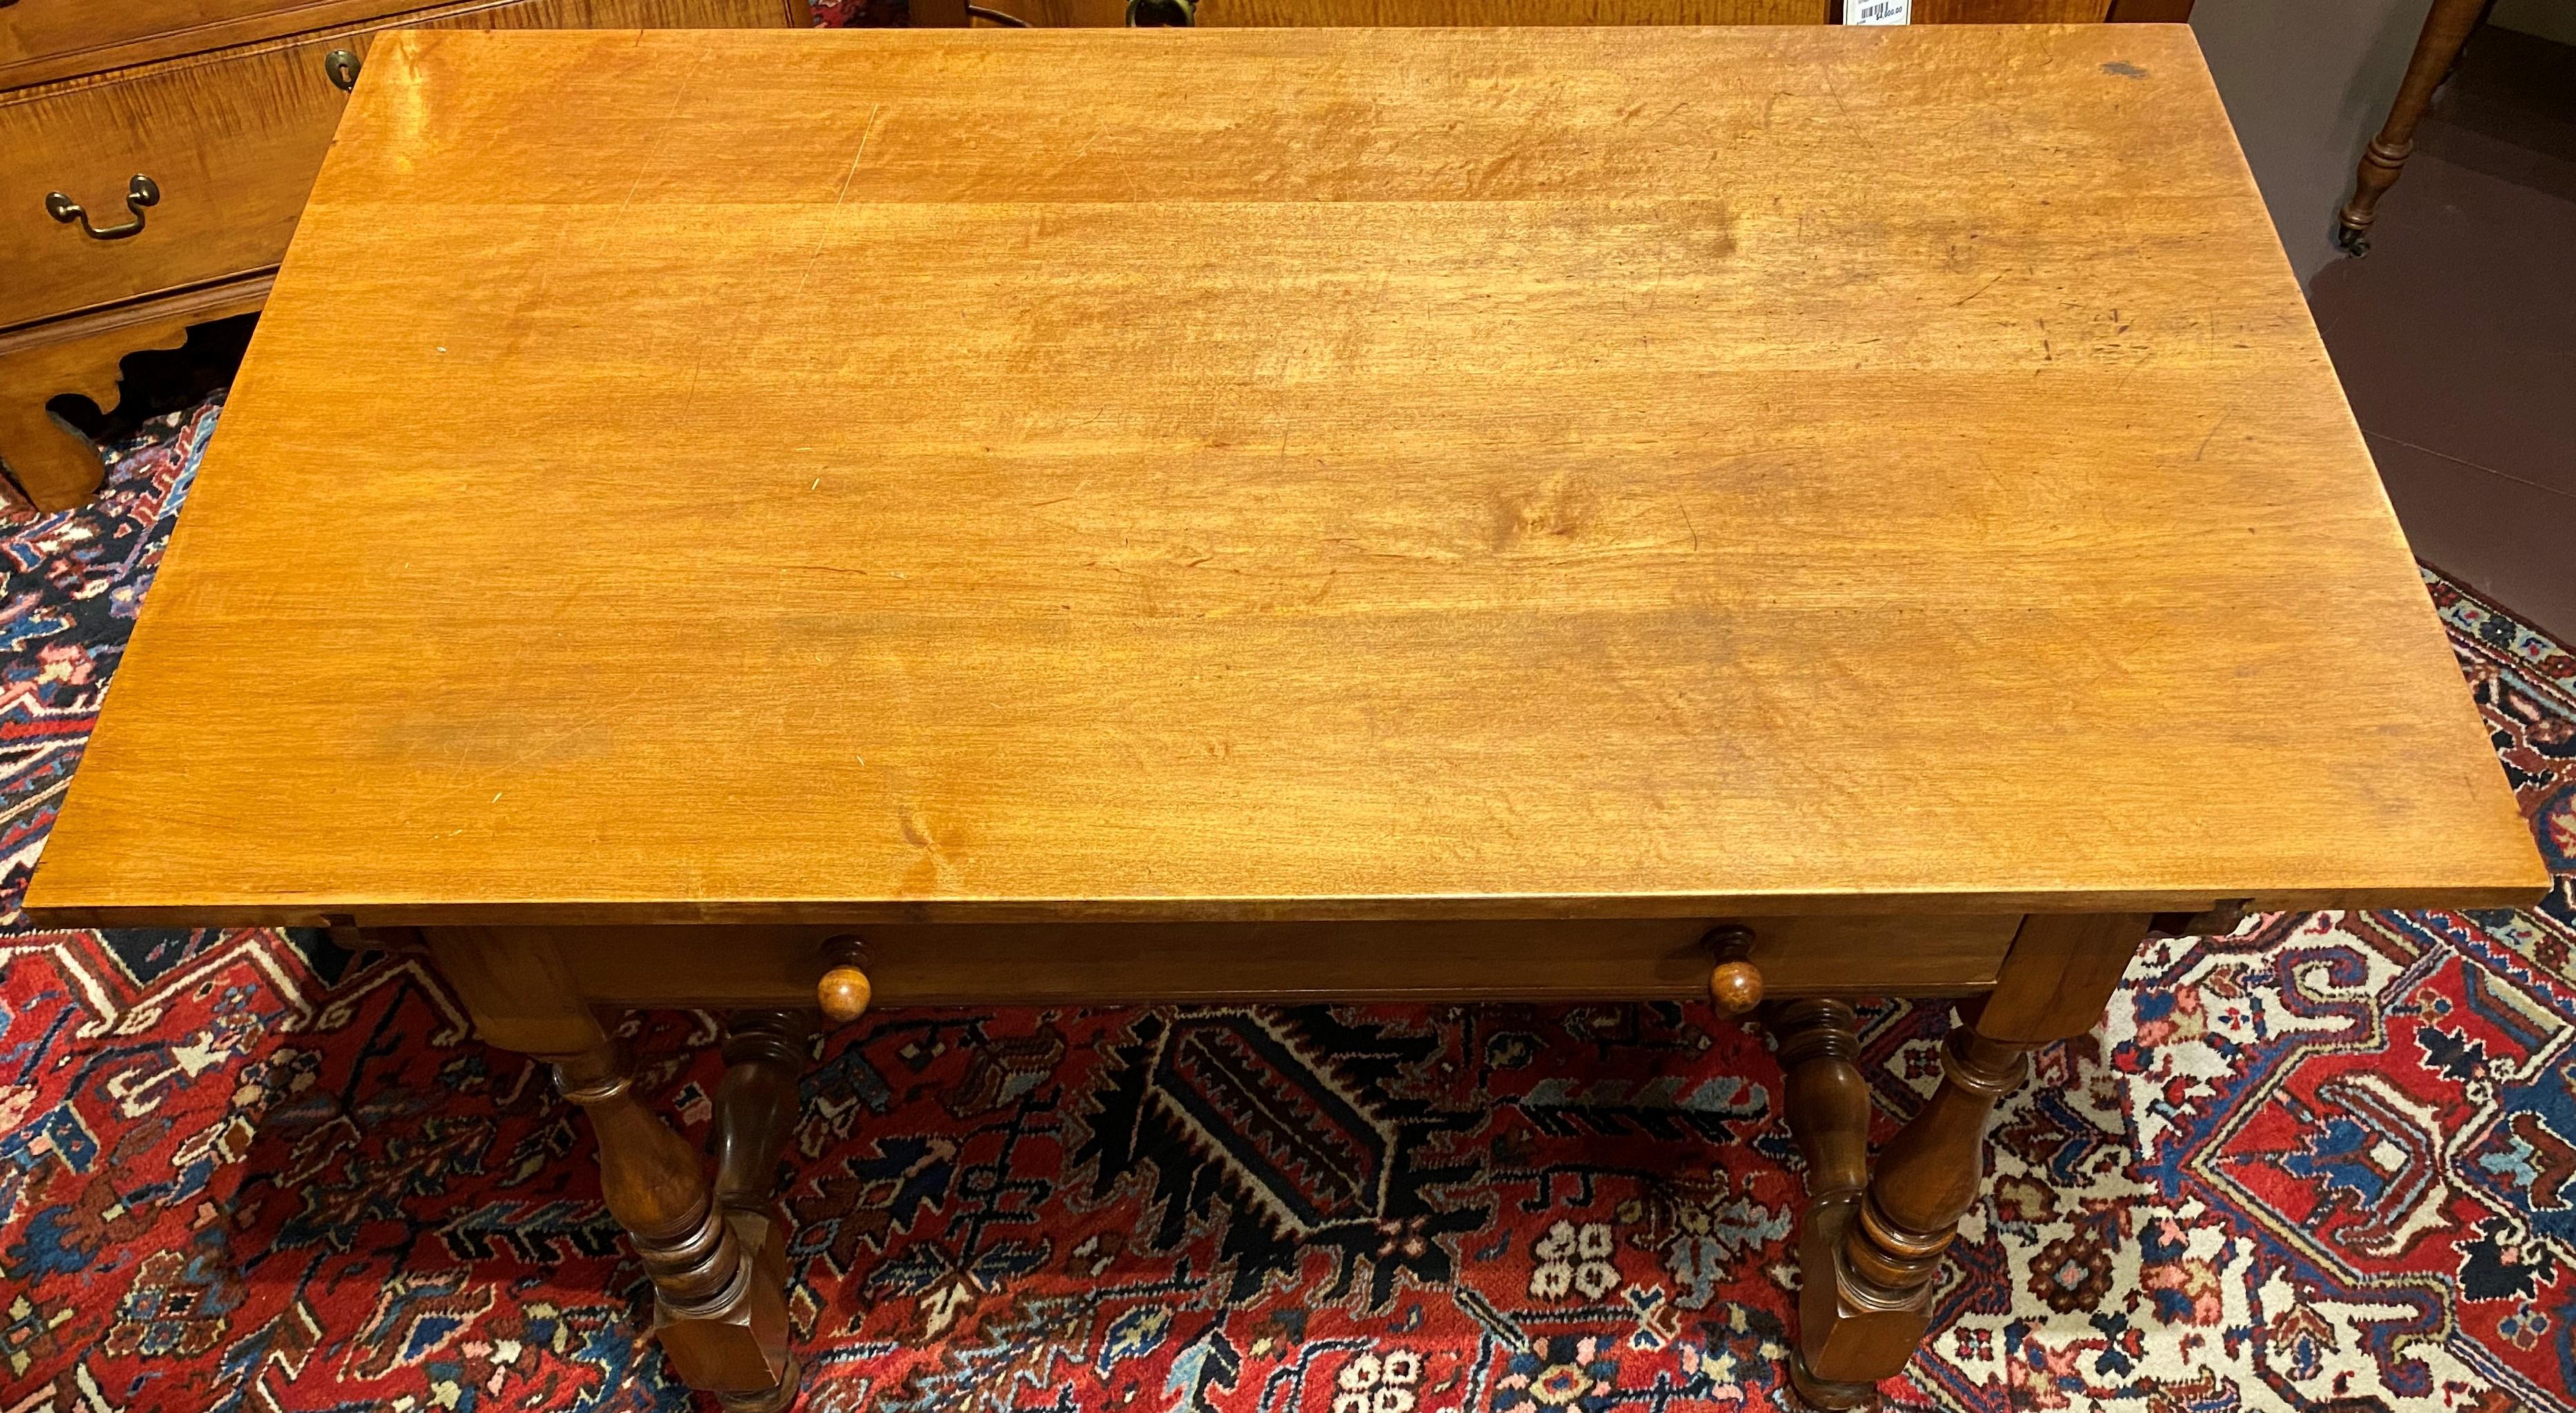 A fine rectangular maple one drawer tavern table with boldly turned legs and H form turned stretchers, the overhanging top secured with four handled pegs, and “Wallace Nutting” stamped inside the drawer. This table dates to the mid 20th century and